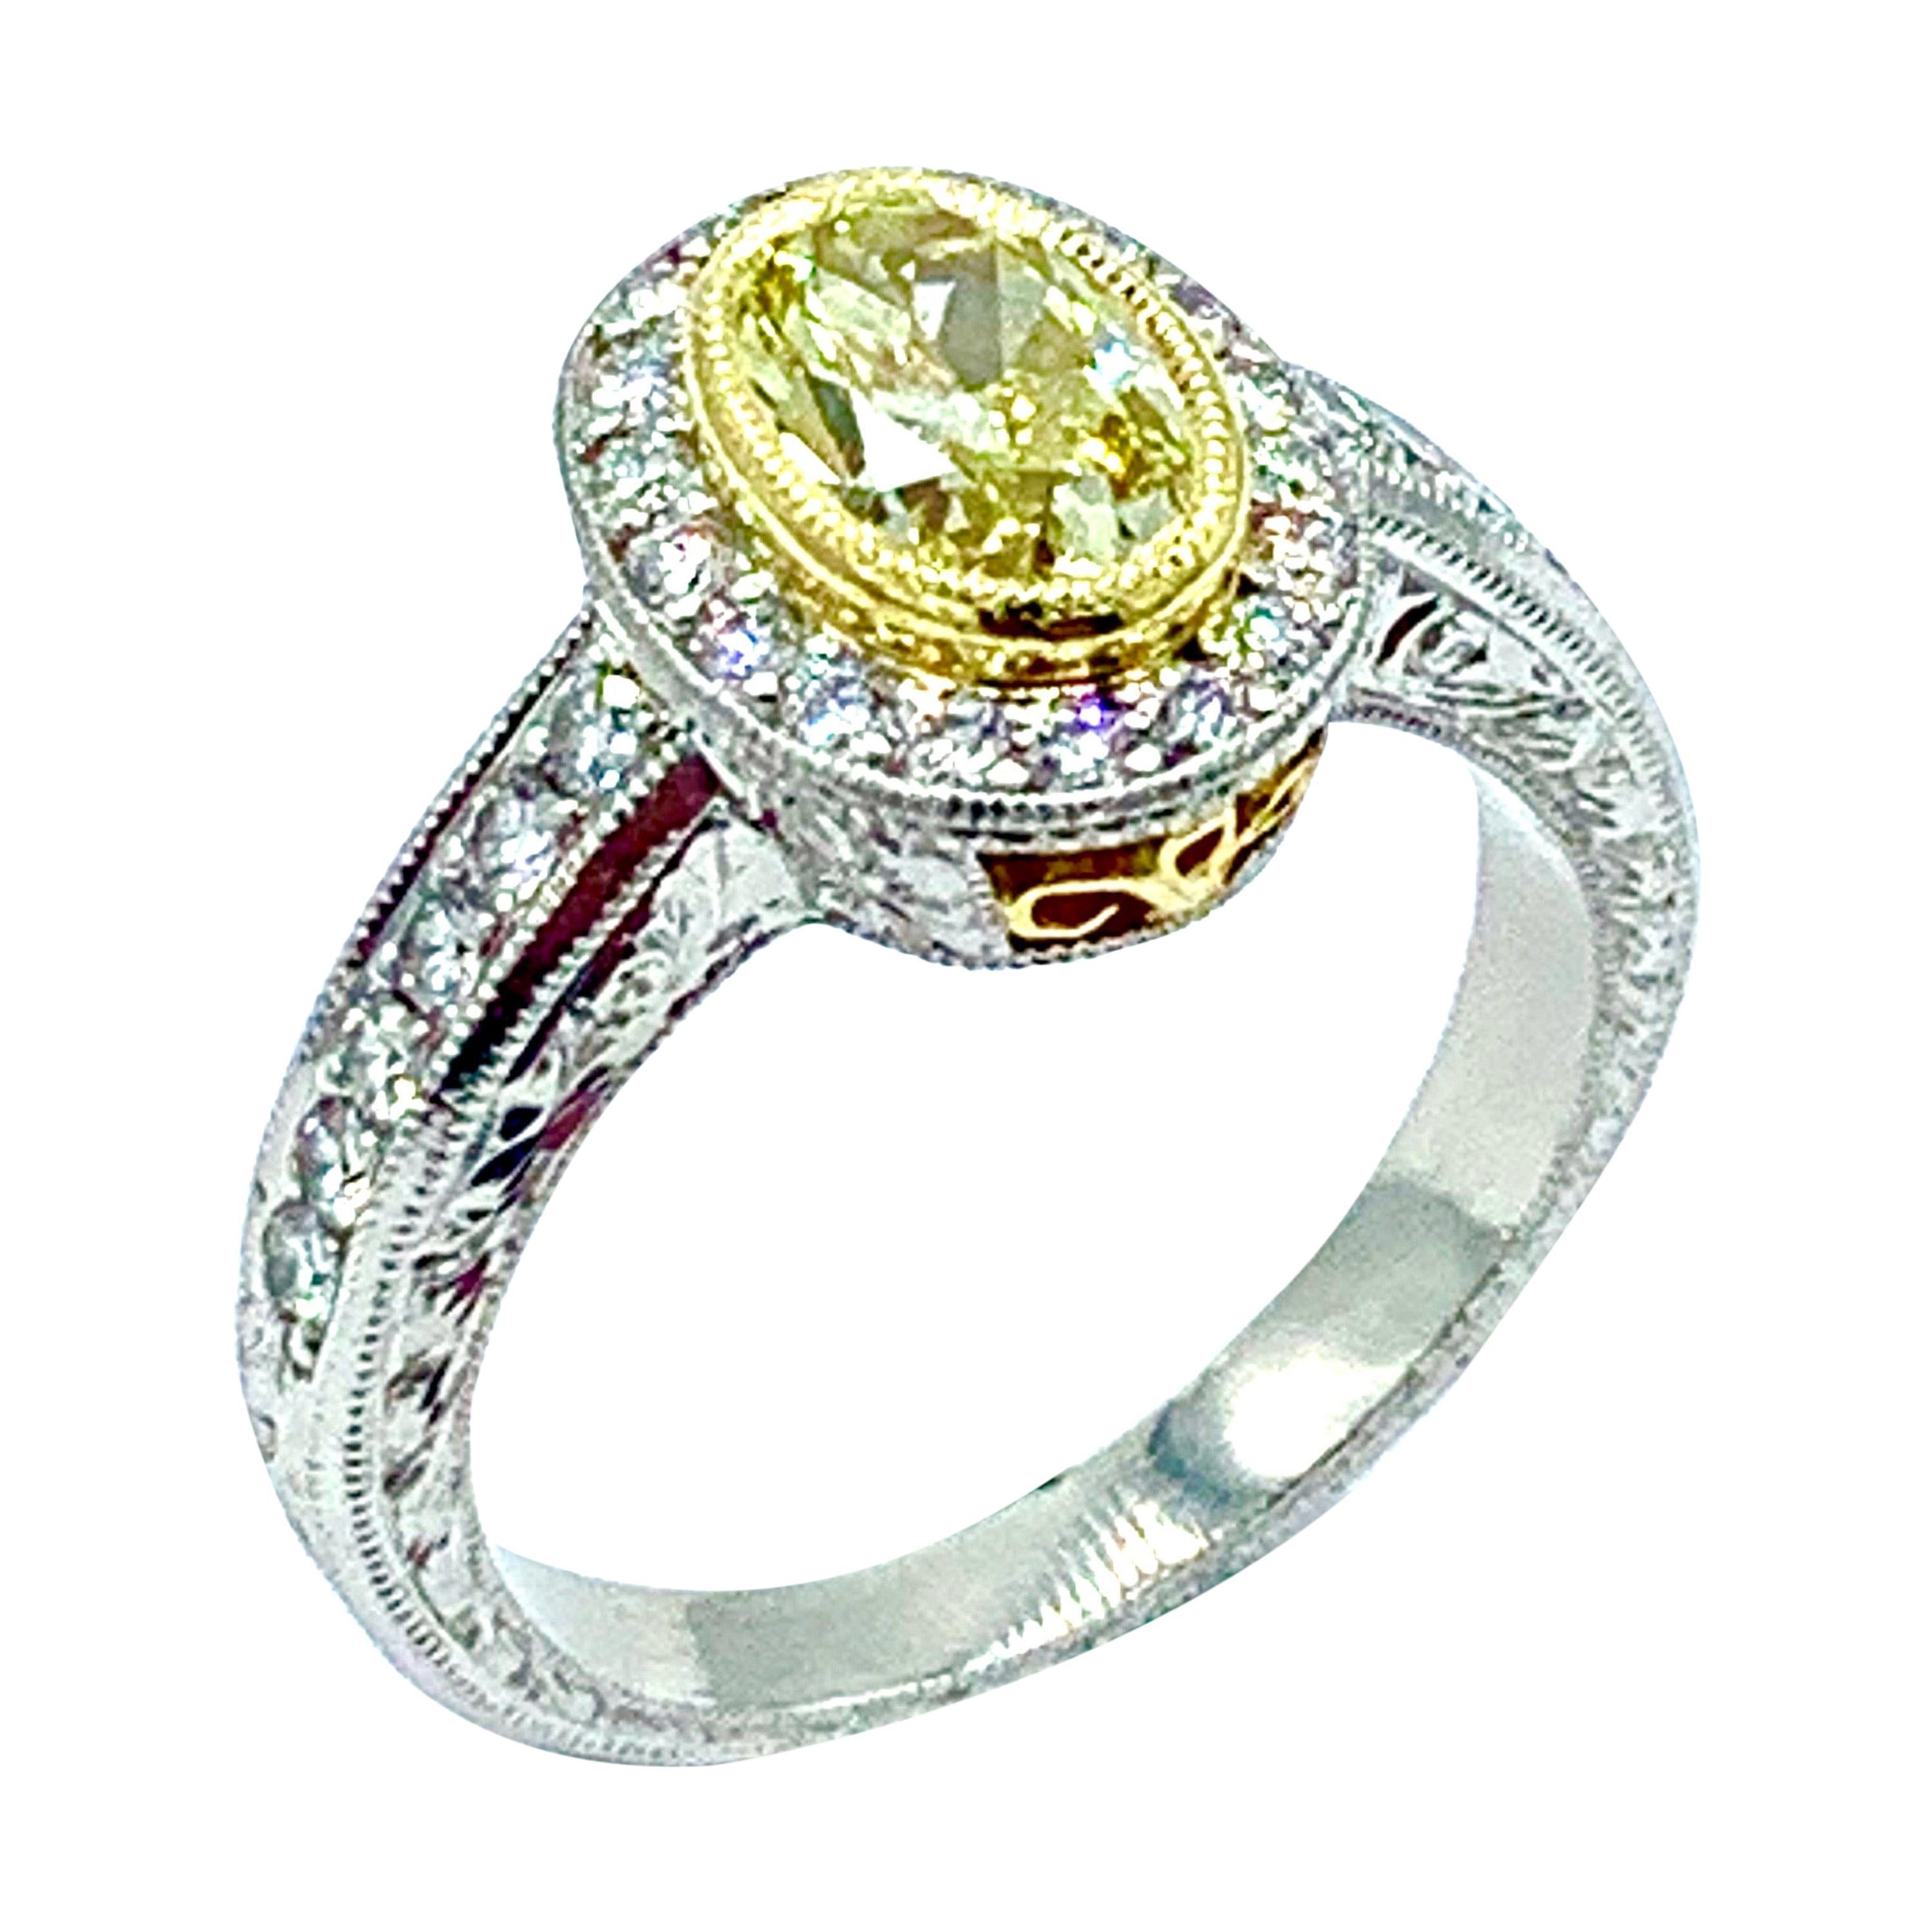 1.00 Carat Fancy Yellow Oval Diamond Platinum and Yellow Gold Engagement Ring